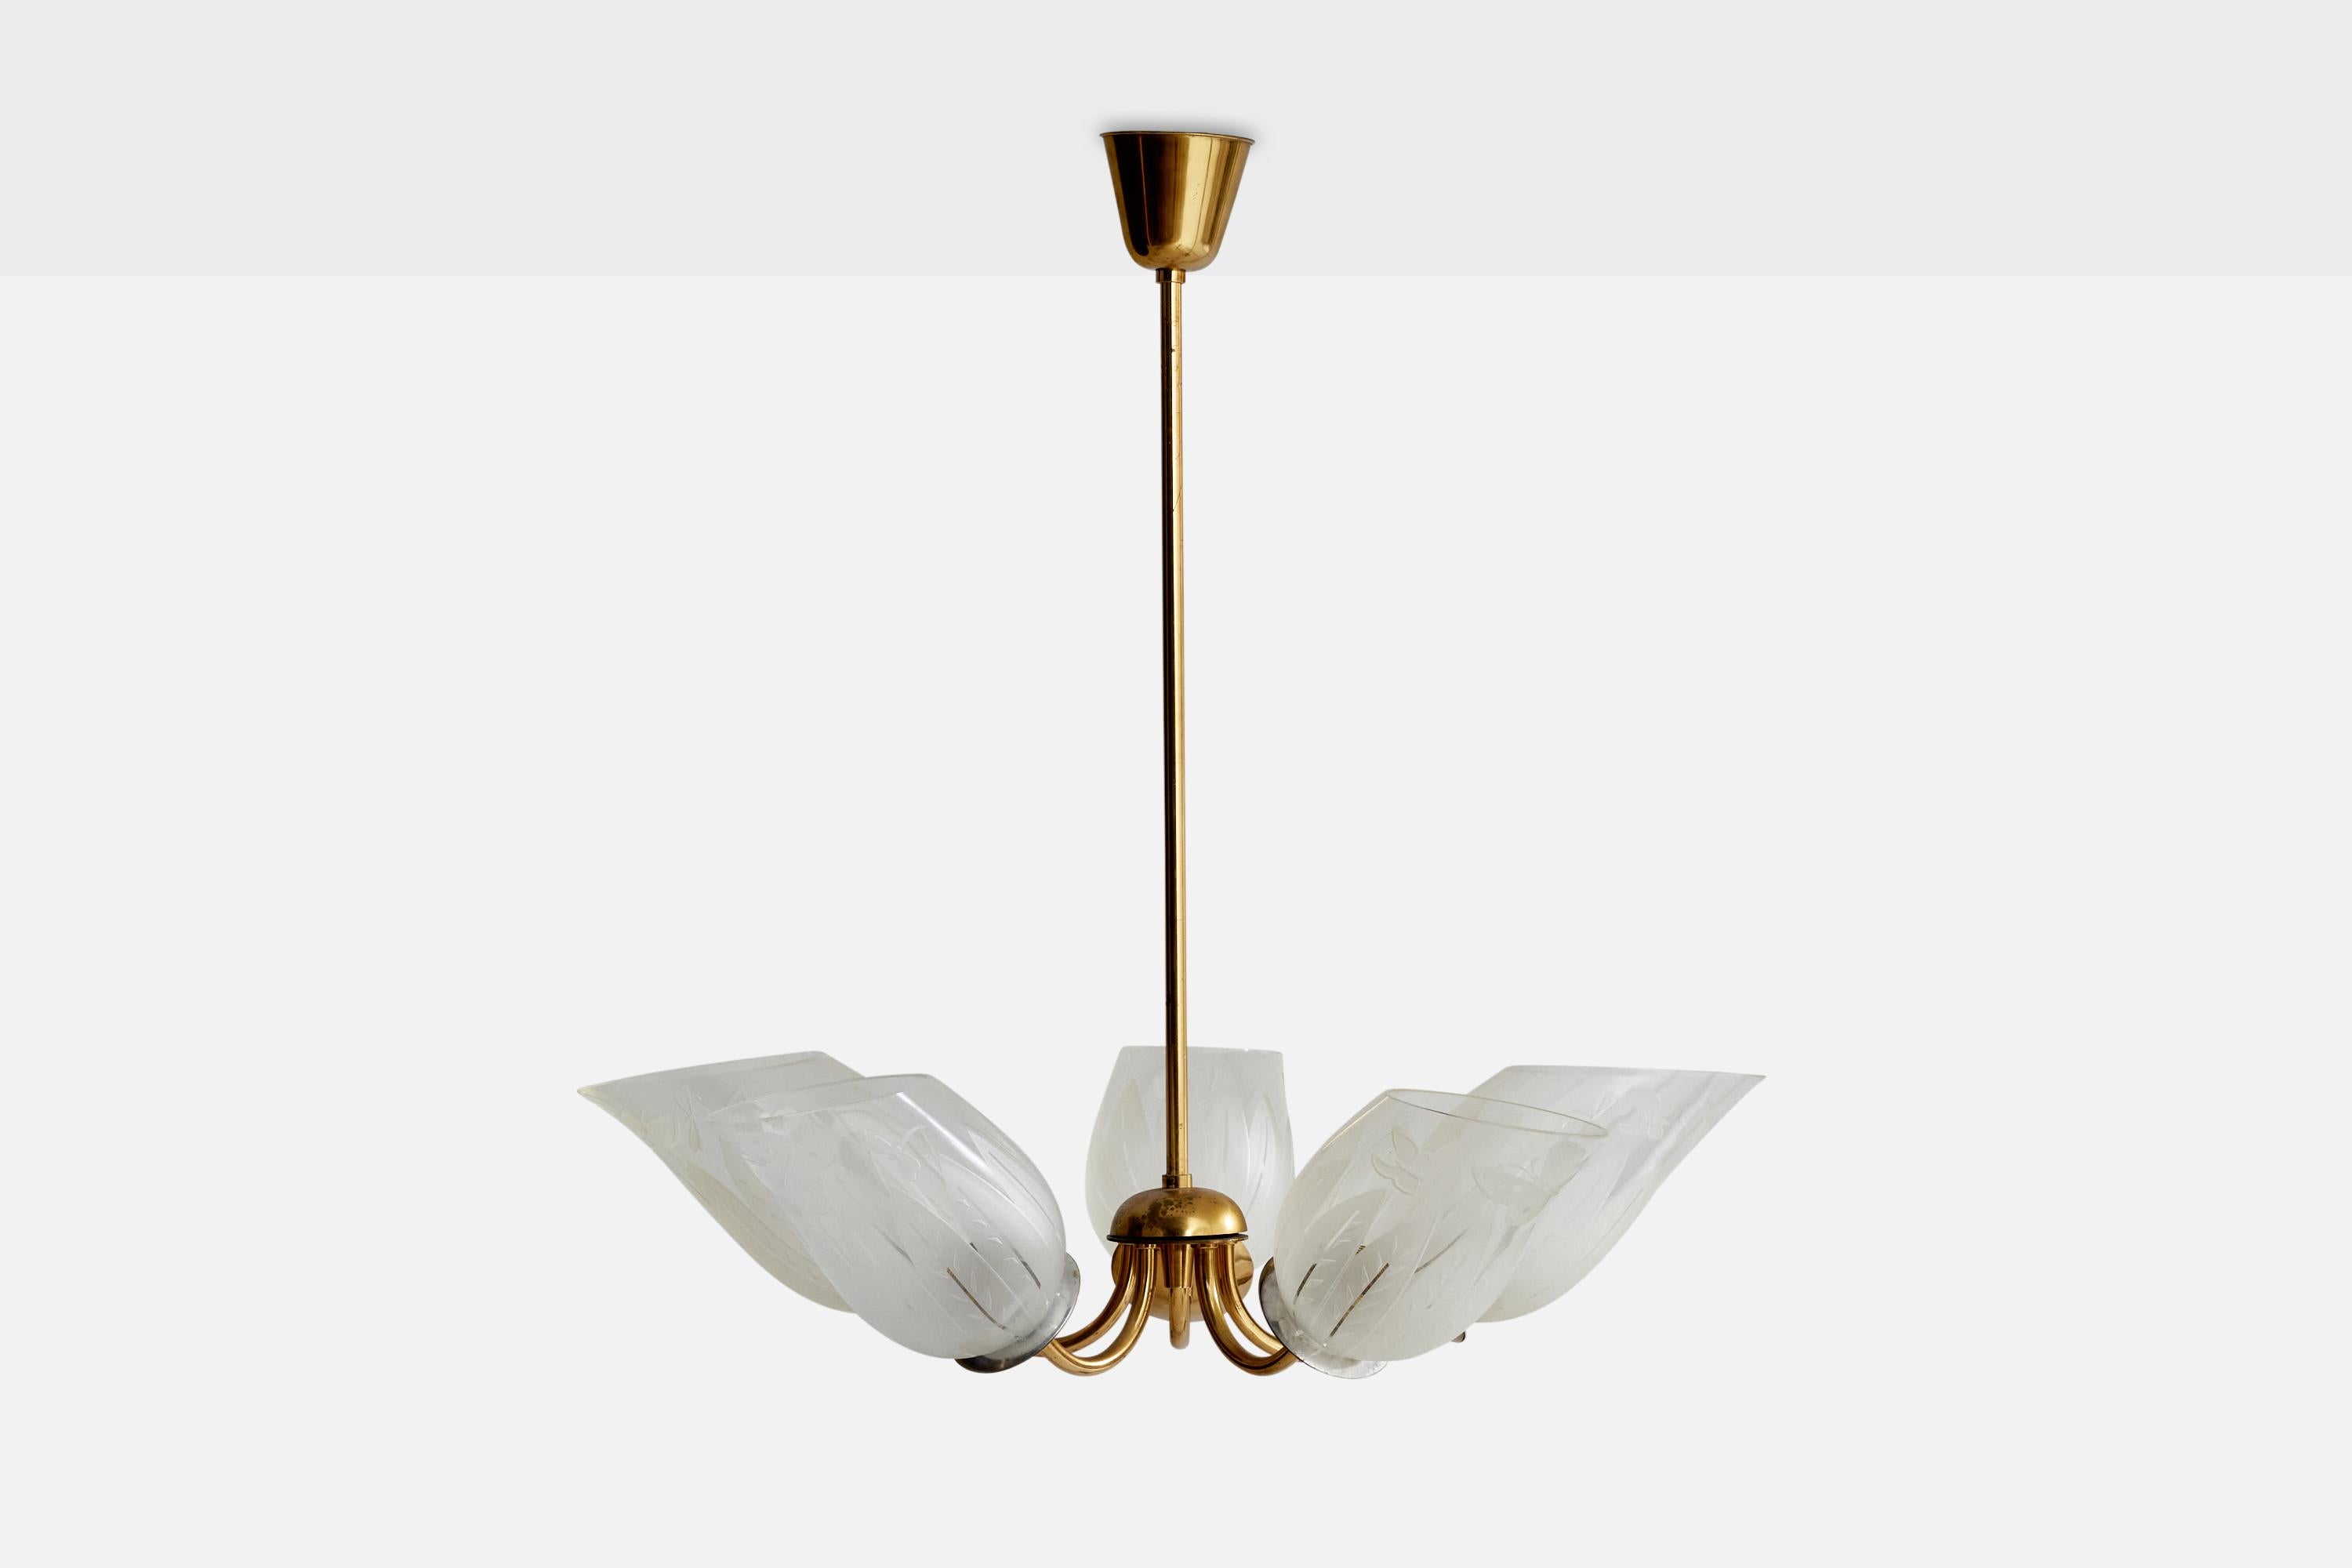 A brass and etched glass chandelier designed by Bo Notini and produced by Glössner & Co, Sweden, 1940s.

Dimensions of canopy (inches): 3” H x 3.7” Diameter
Socket takes standard E-26 bulbs. 5 socketsThere is no maximum wattage stated on the